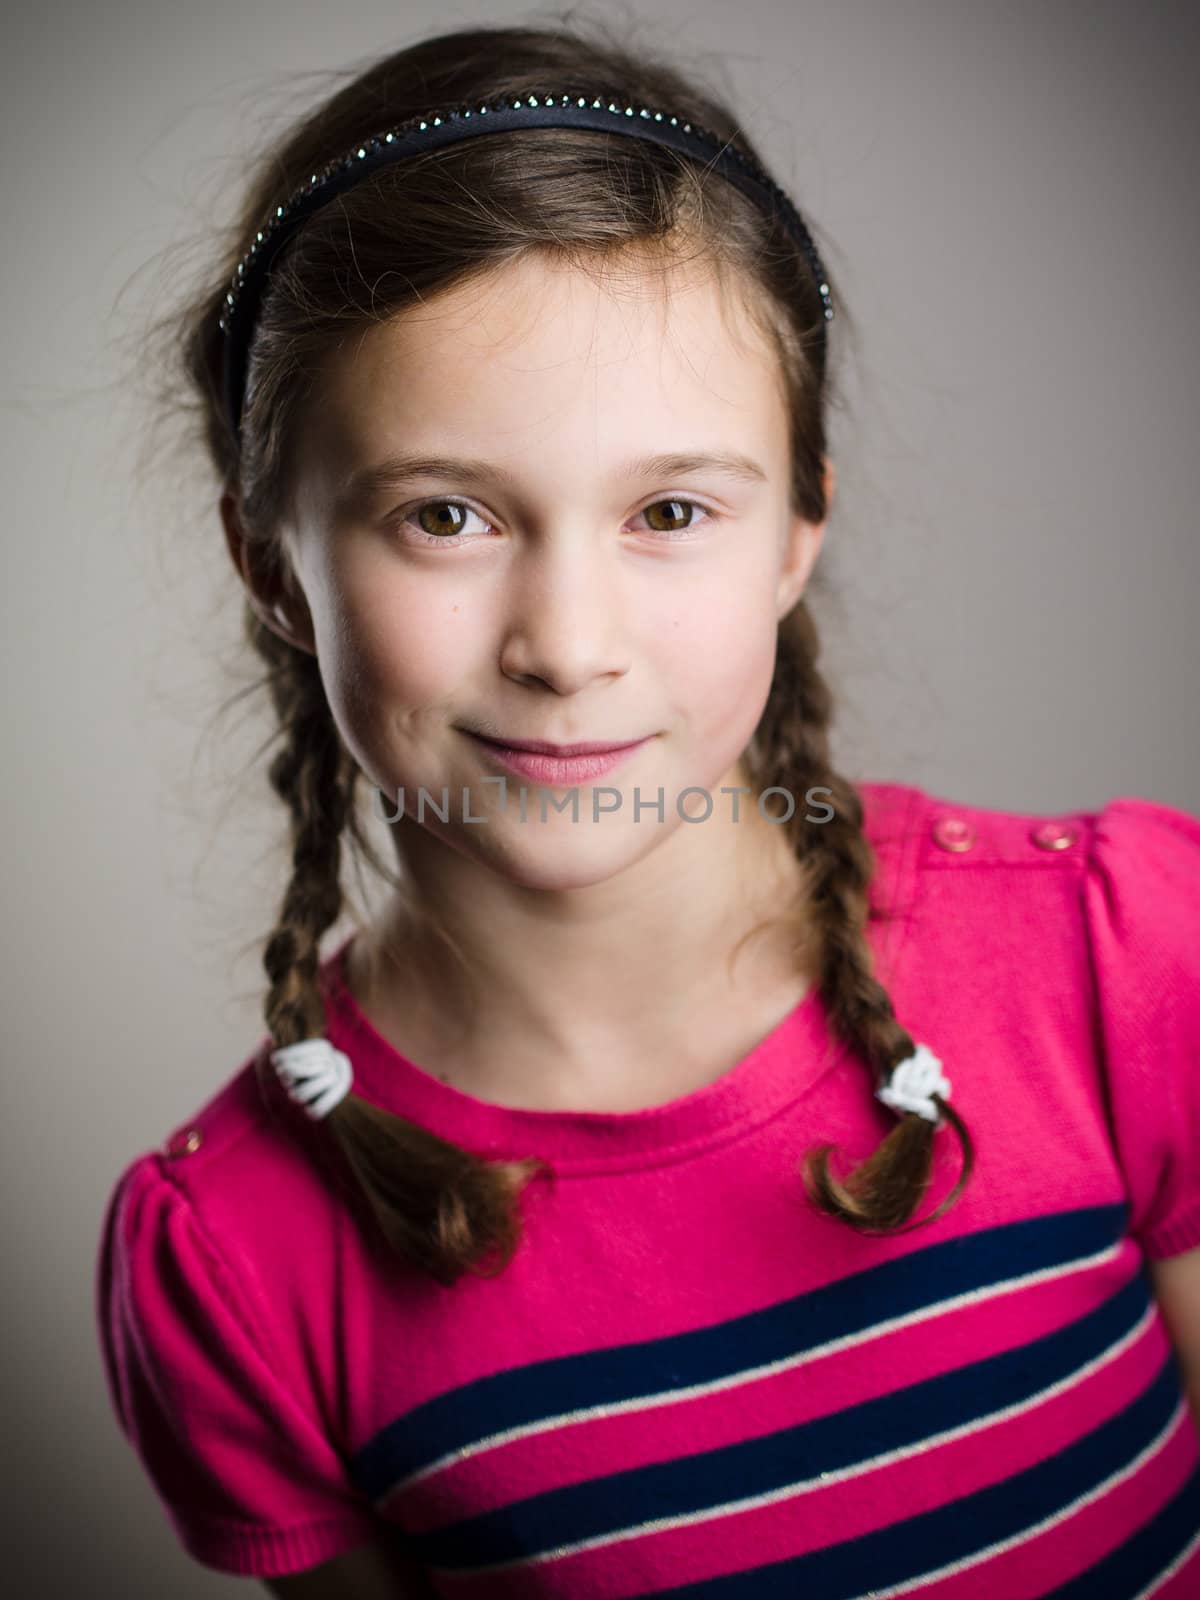 Cute little girl by Talanis